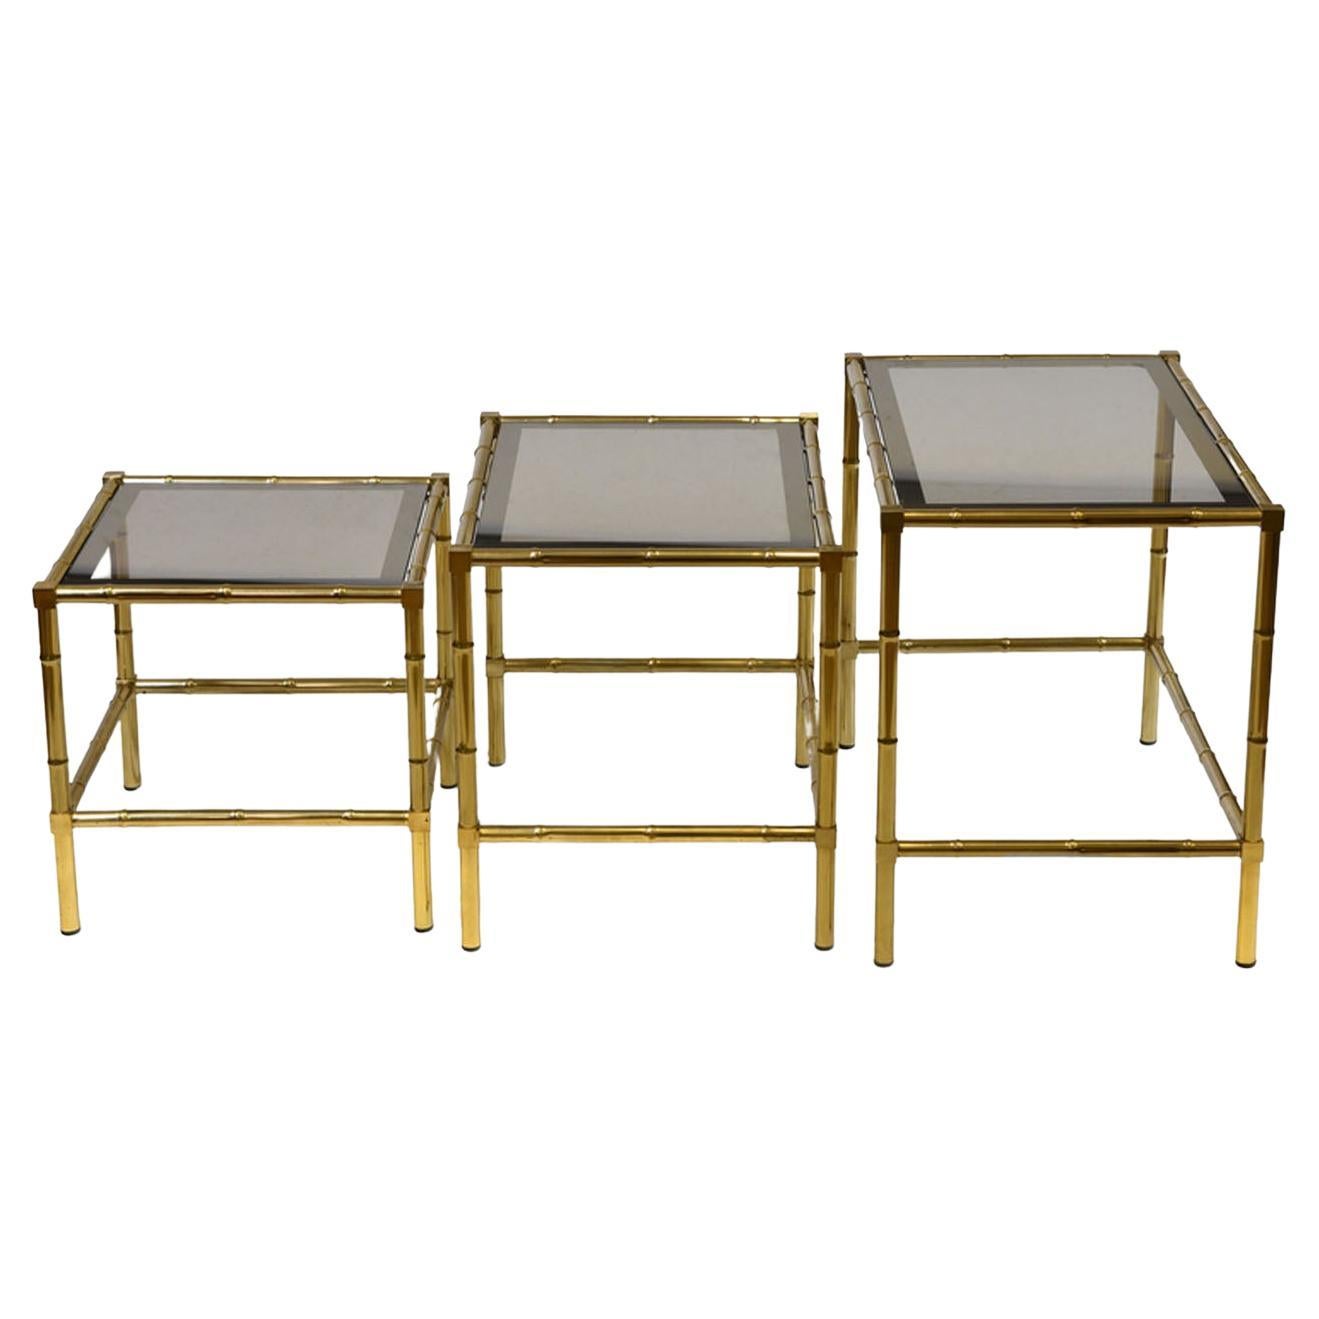 A vintage French brass plated faux bamboo nest of three tables with smoked glass inset in the Jacques Adnet manner. Circa 1970.

The tables are in good condition for their age, showing some light marks to the finish in places. The lightly smoked